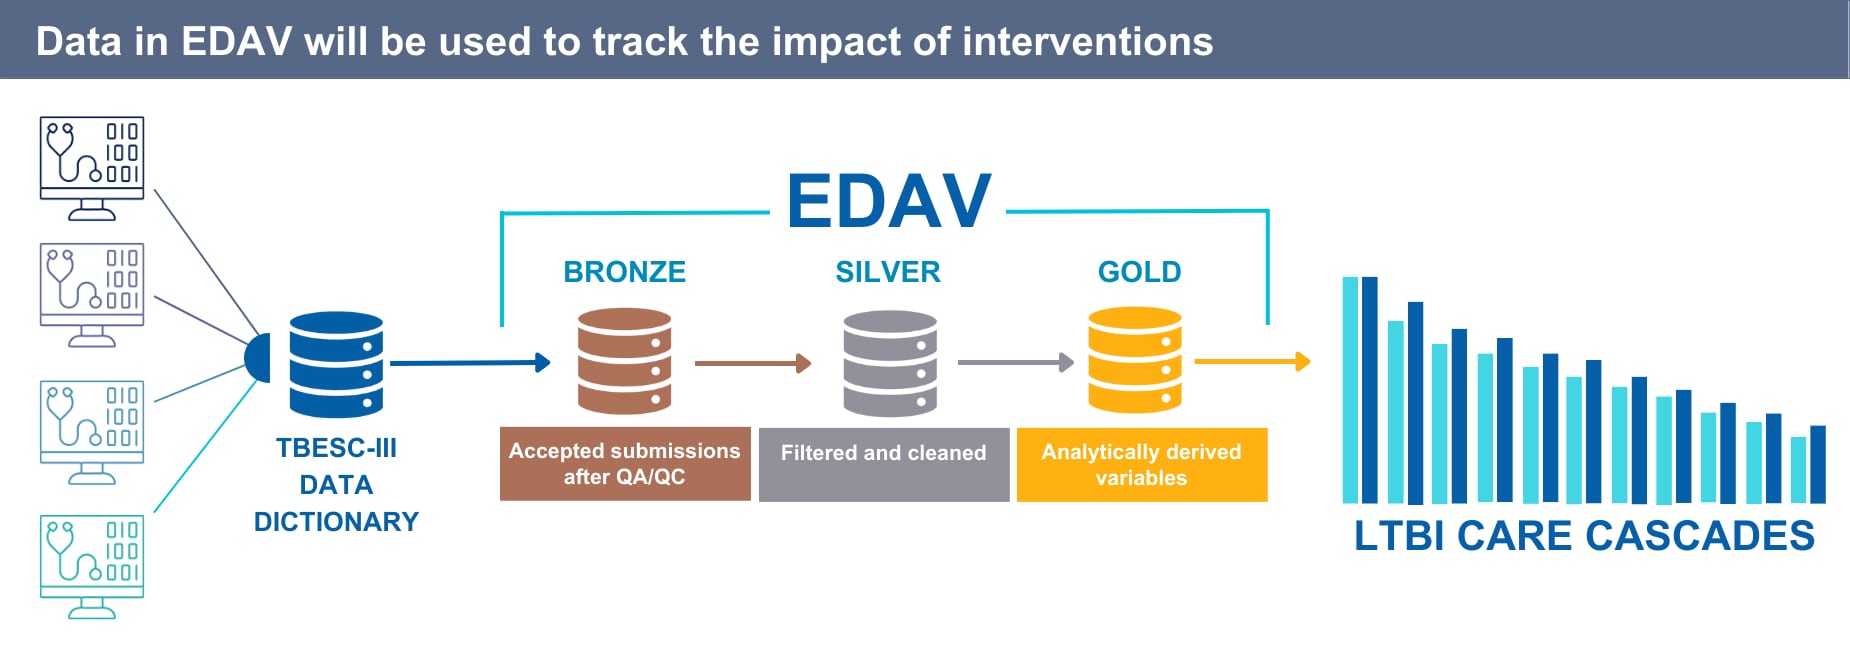 Data in EDAV will be used to track the impact of interventions